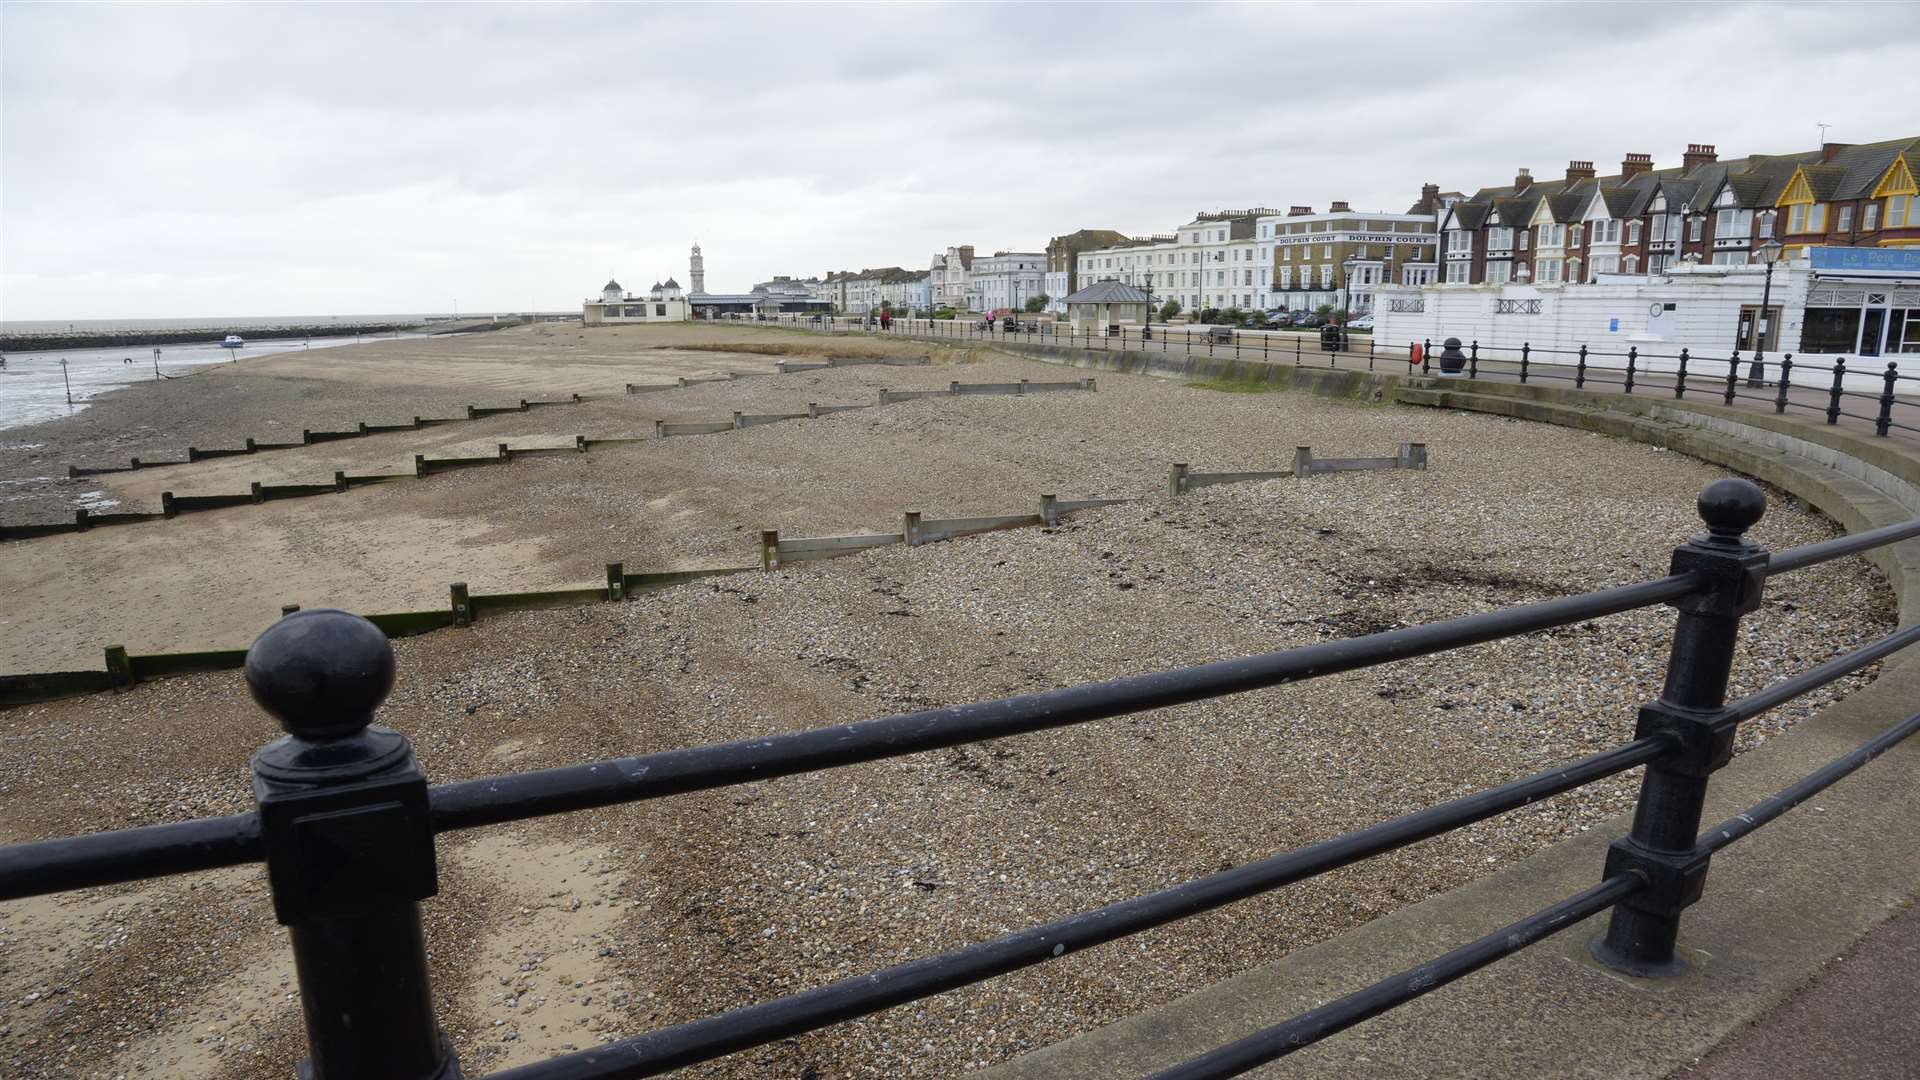 There are plans for the seafront to be developed